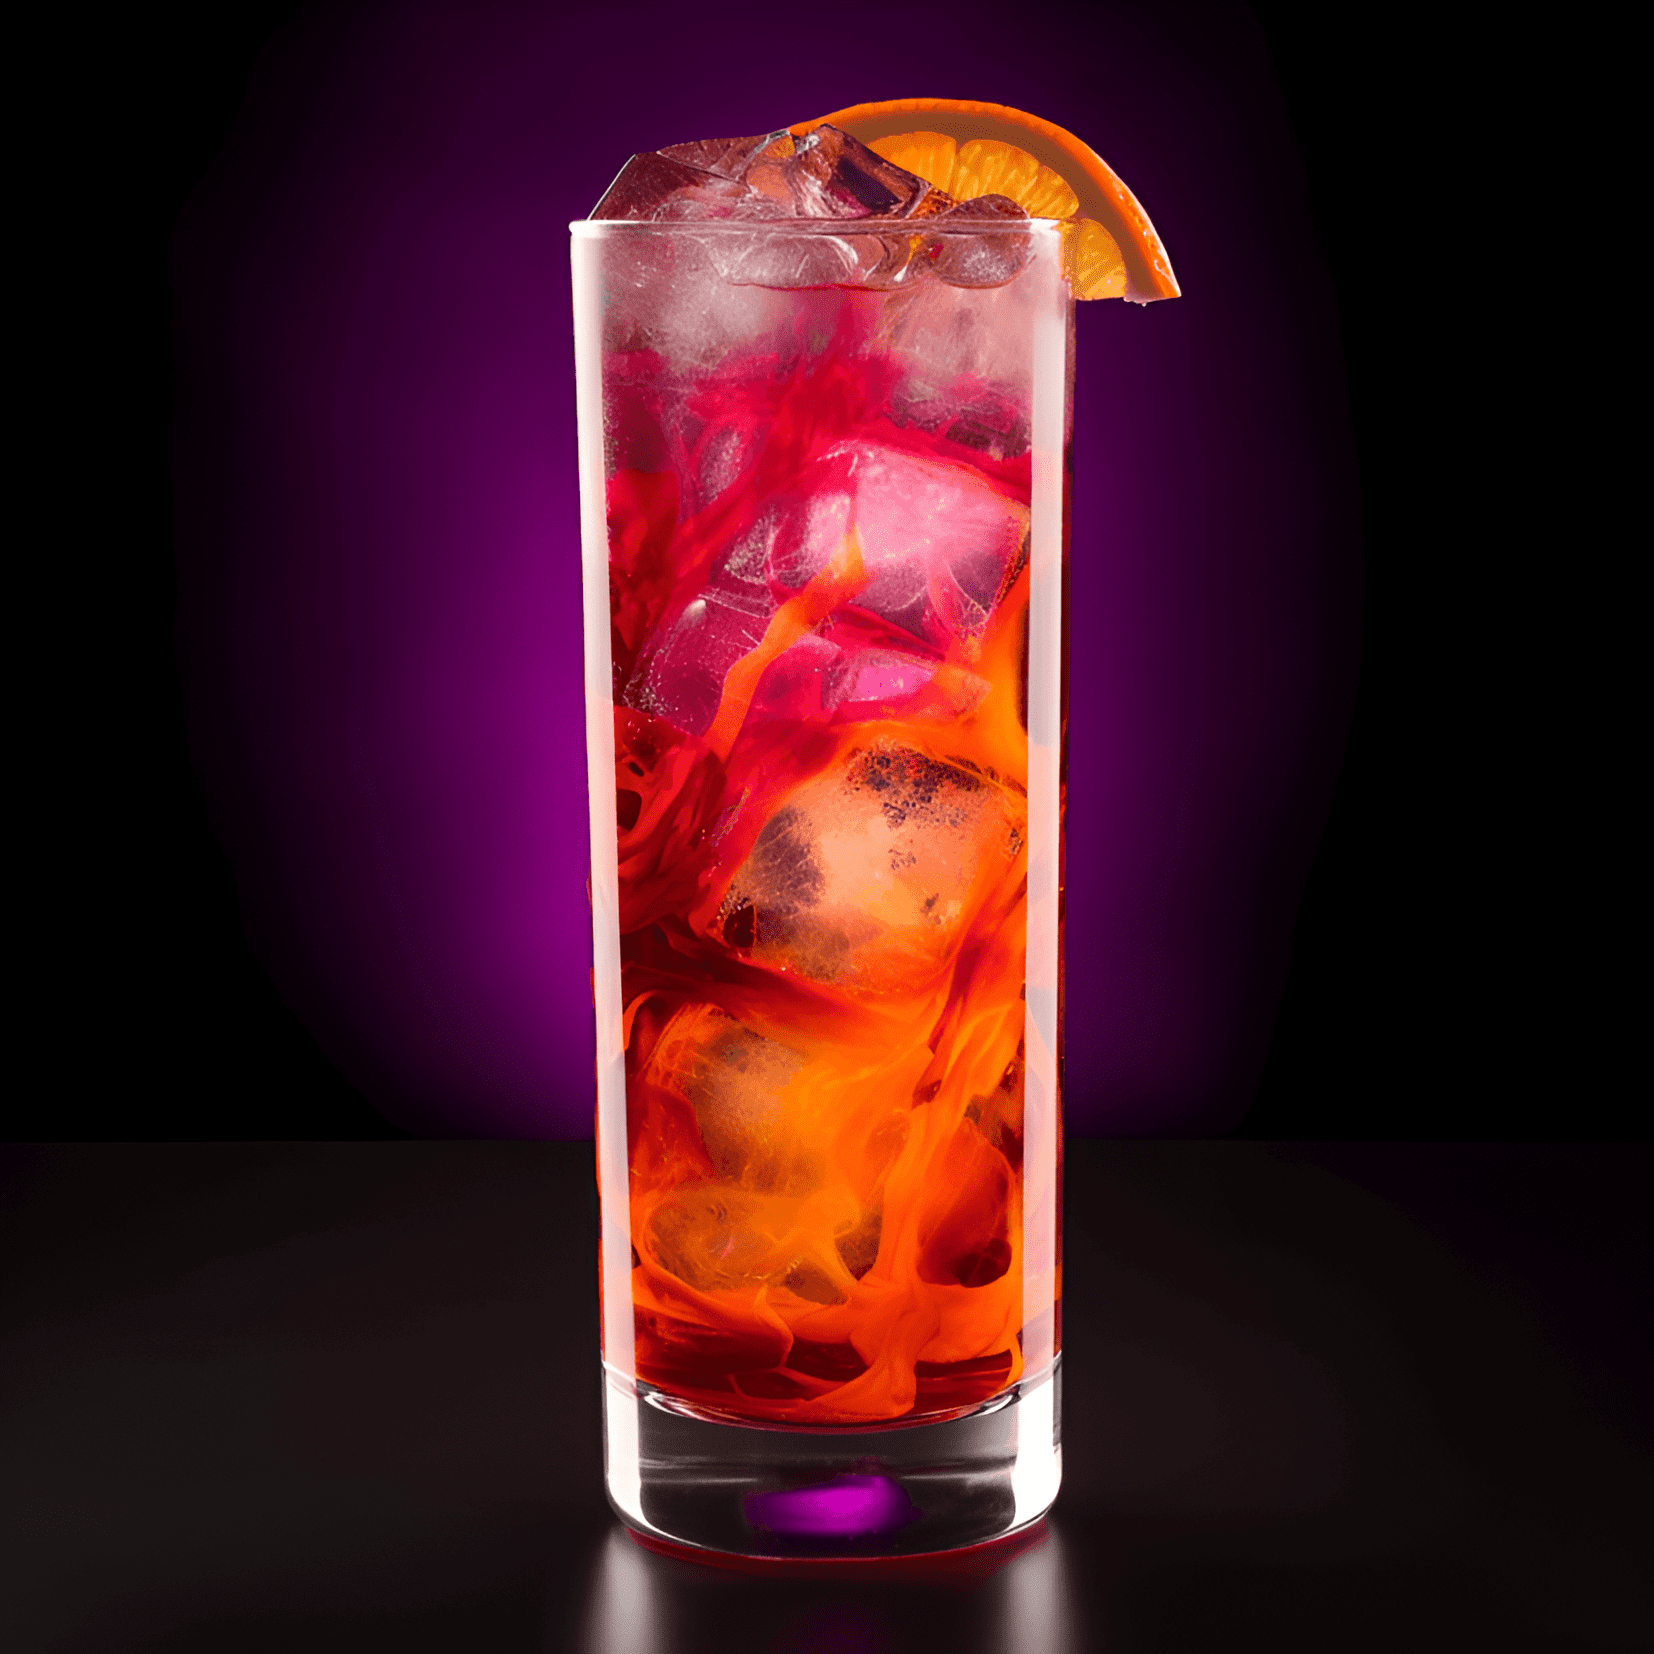 Voodoo Cocktail Recipe - The Voodoo cocktail is a complex and intriguing blend of flavors, featuring a sweet and fruity taste with a hint of spice and a subtle, smoky undertone. The drink is both refreshing and invigorating, with a slightly tangy finish.